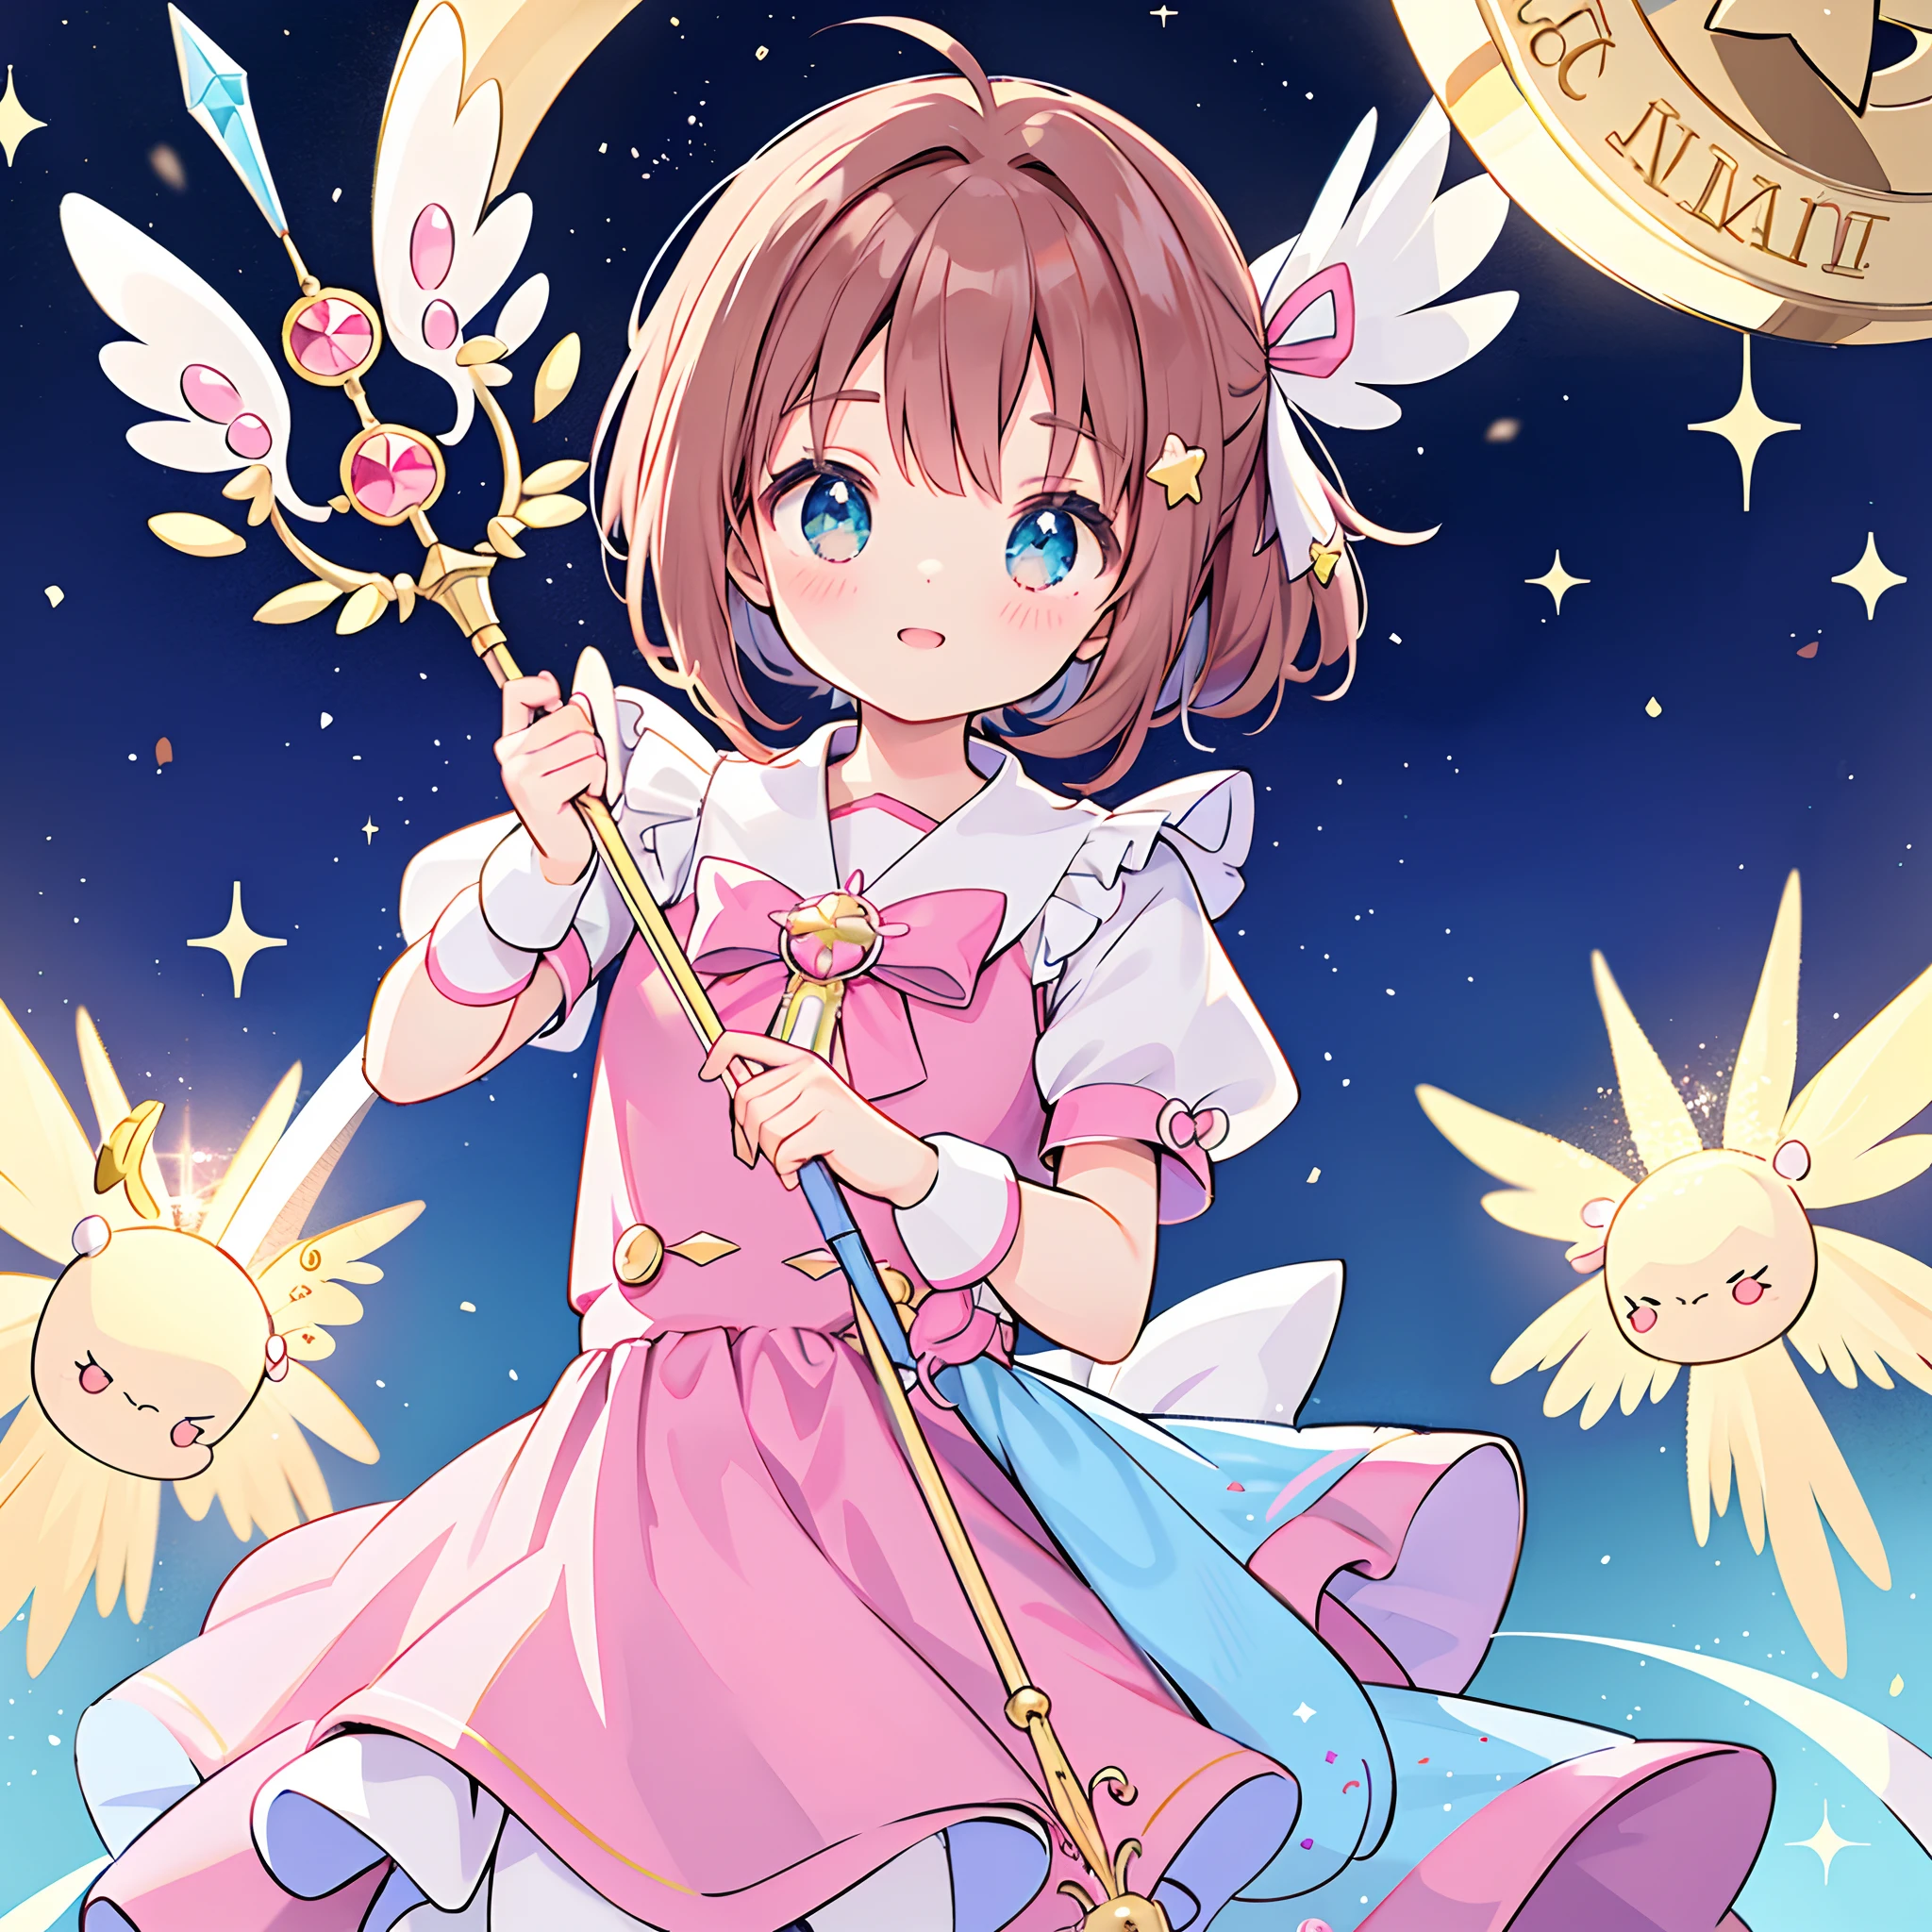 k hd，Anime girl with wand and star wand in her hand, portrait of magical girl, sparkling magical girl, magical , cardcaptor sakura, clean and meticulous anime art, magical girl anime mahou shojo, beautiful anime art style, cute anime girl portraits, carrying a magical staff, zerochan art, lovely art style, astral fairy, Soft anime illustration